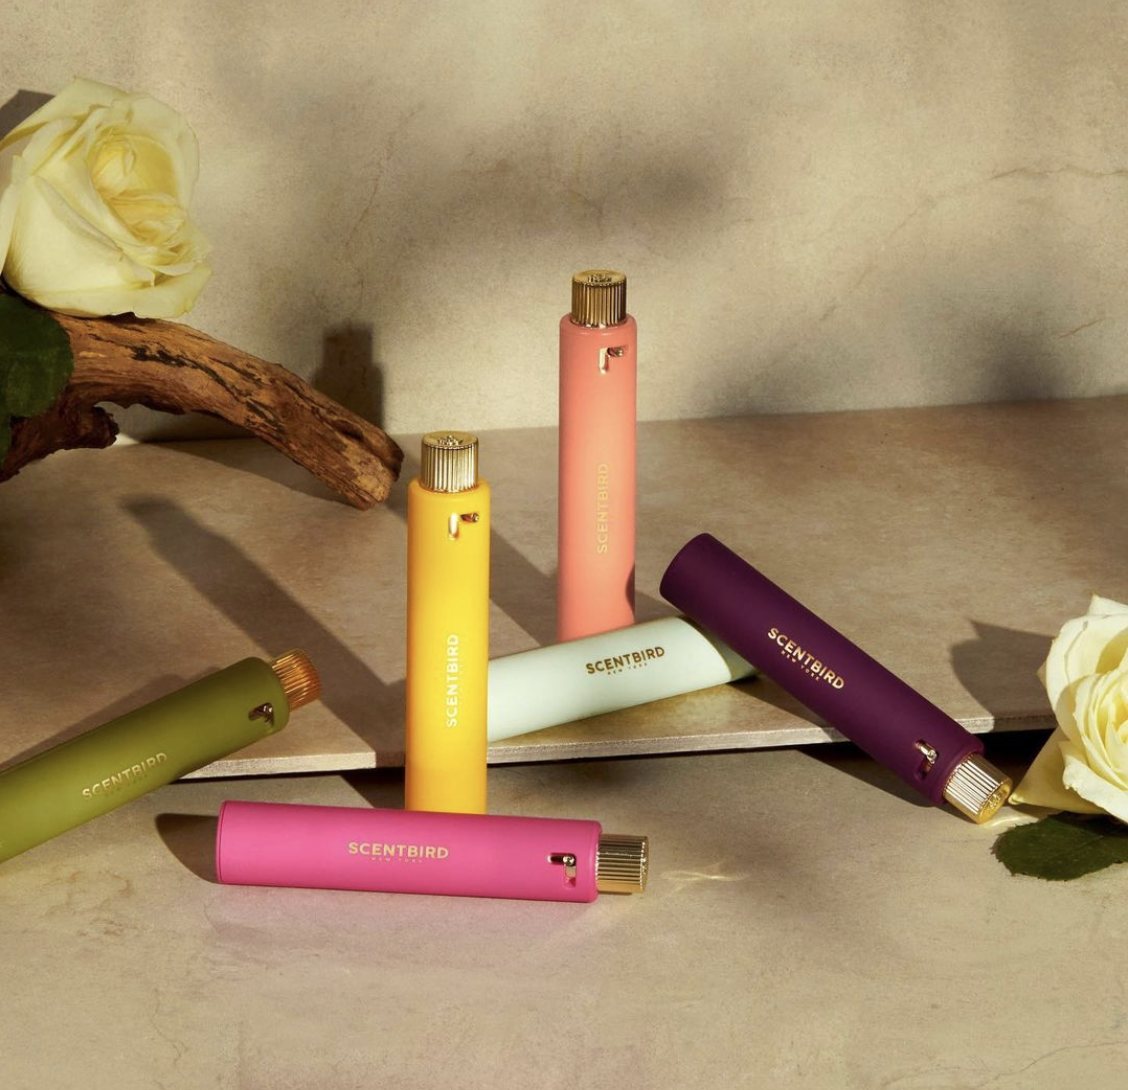 I Tried Scentbird and Here's My Unfiltered Review